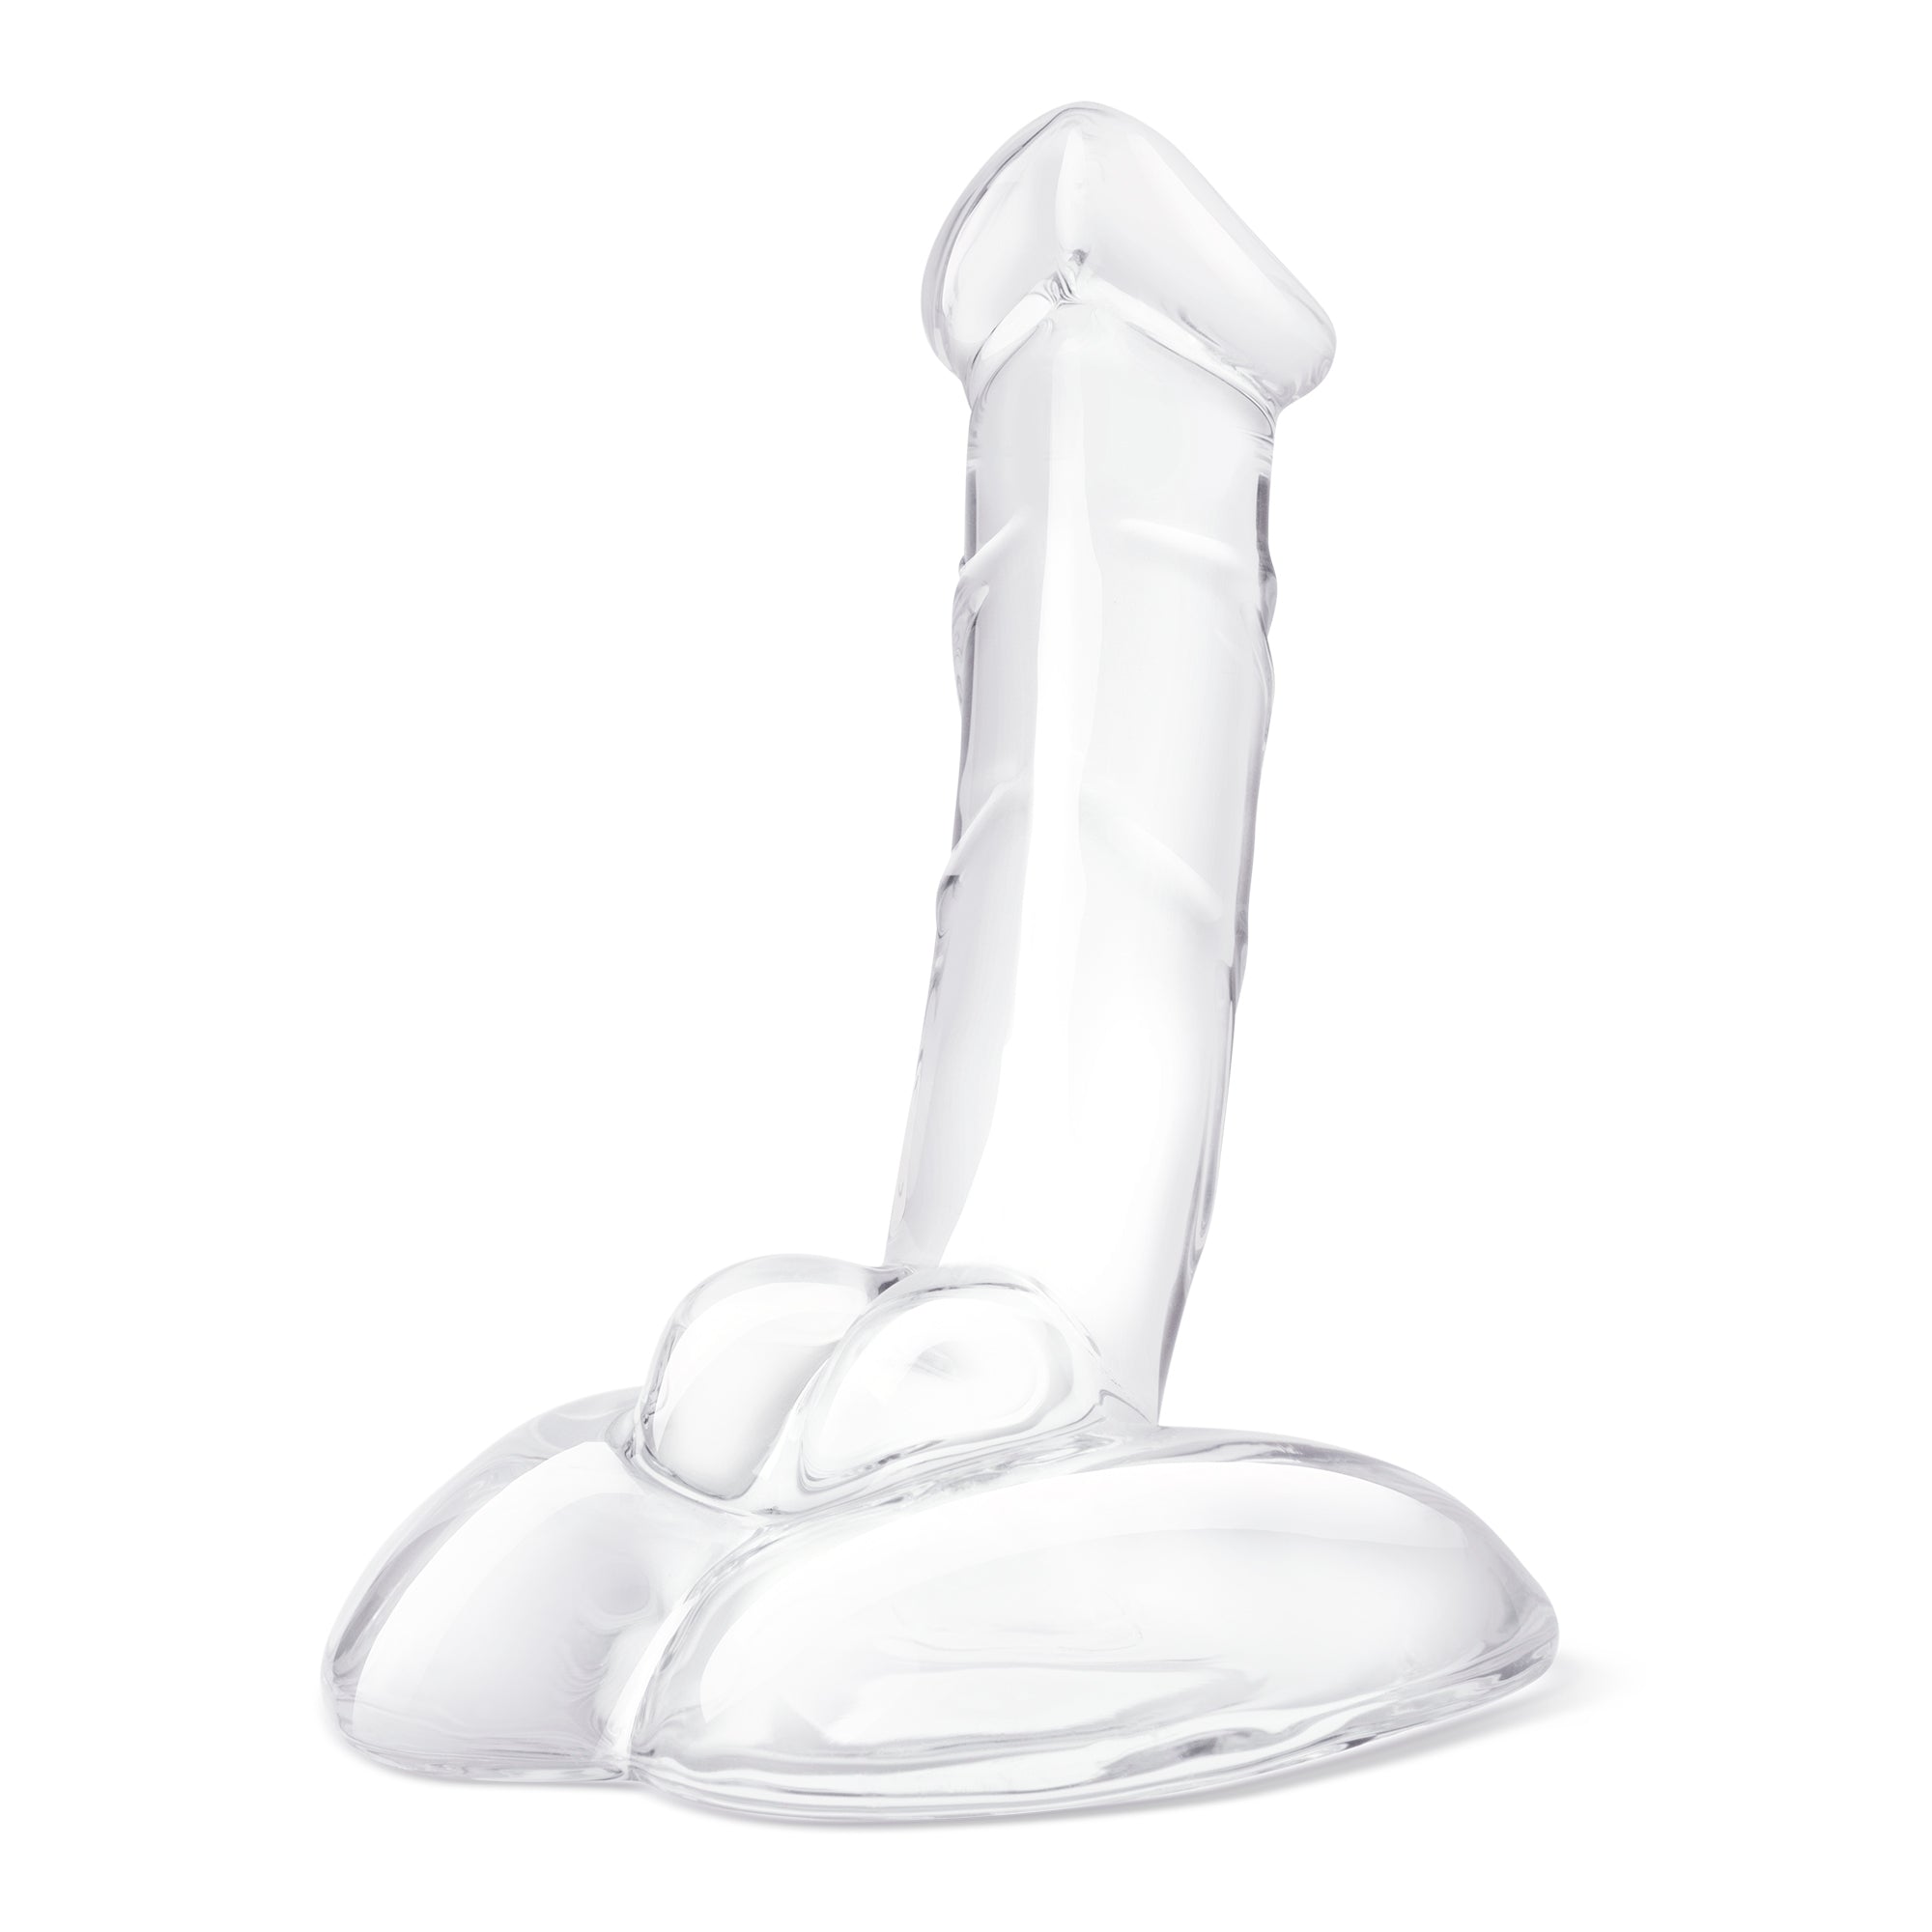 7.5" Rideable Standing Glass Cock With Stability Base